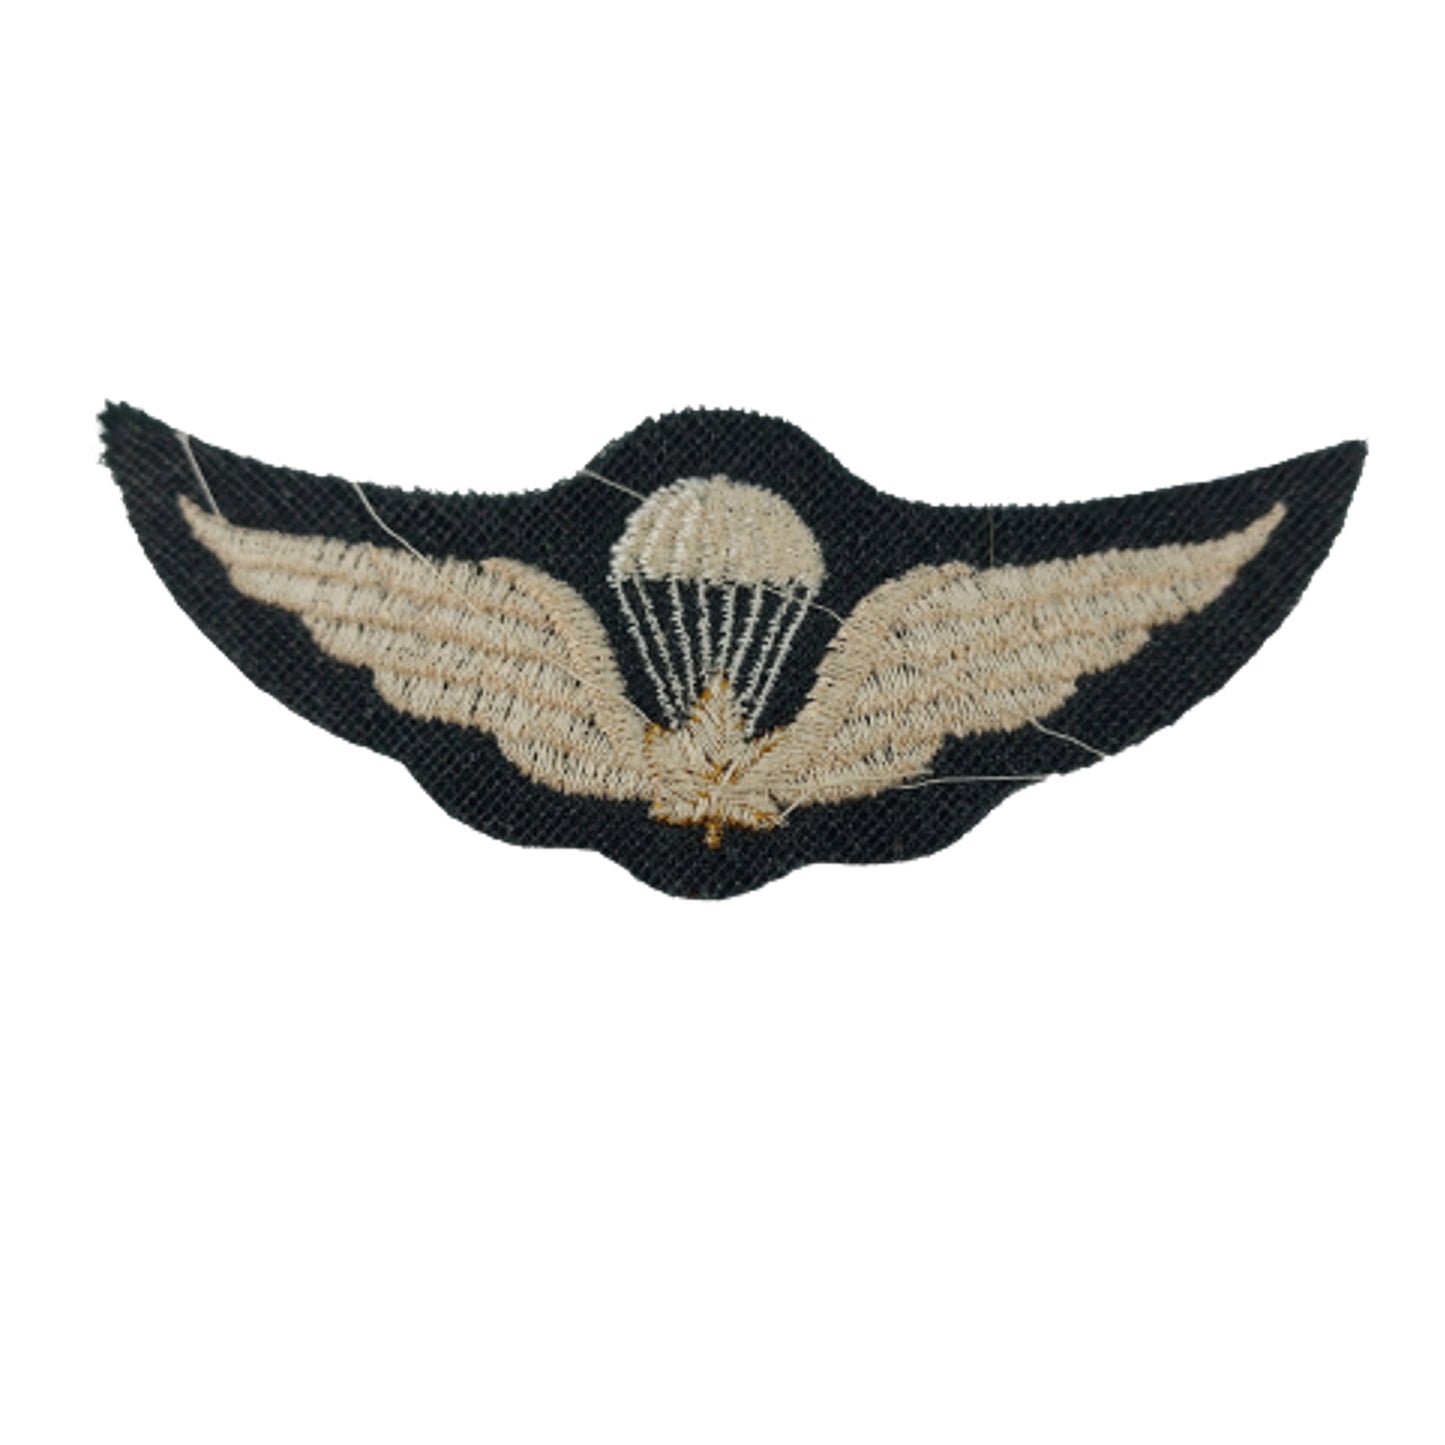 Canadian Force Pattern 67 Airborne Jump Wings Insignia